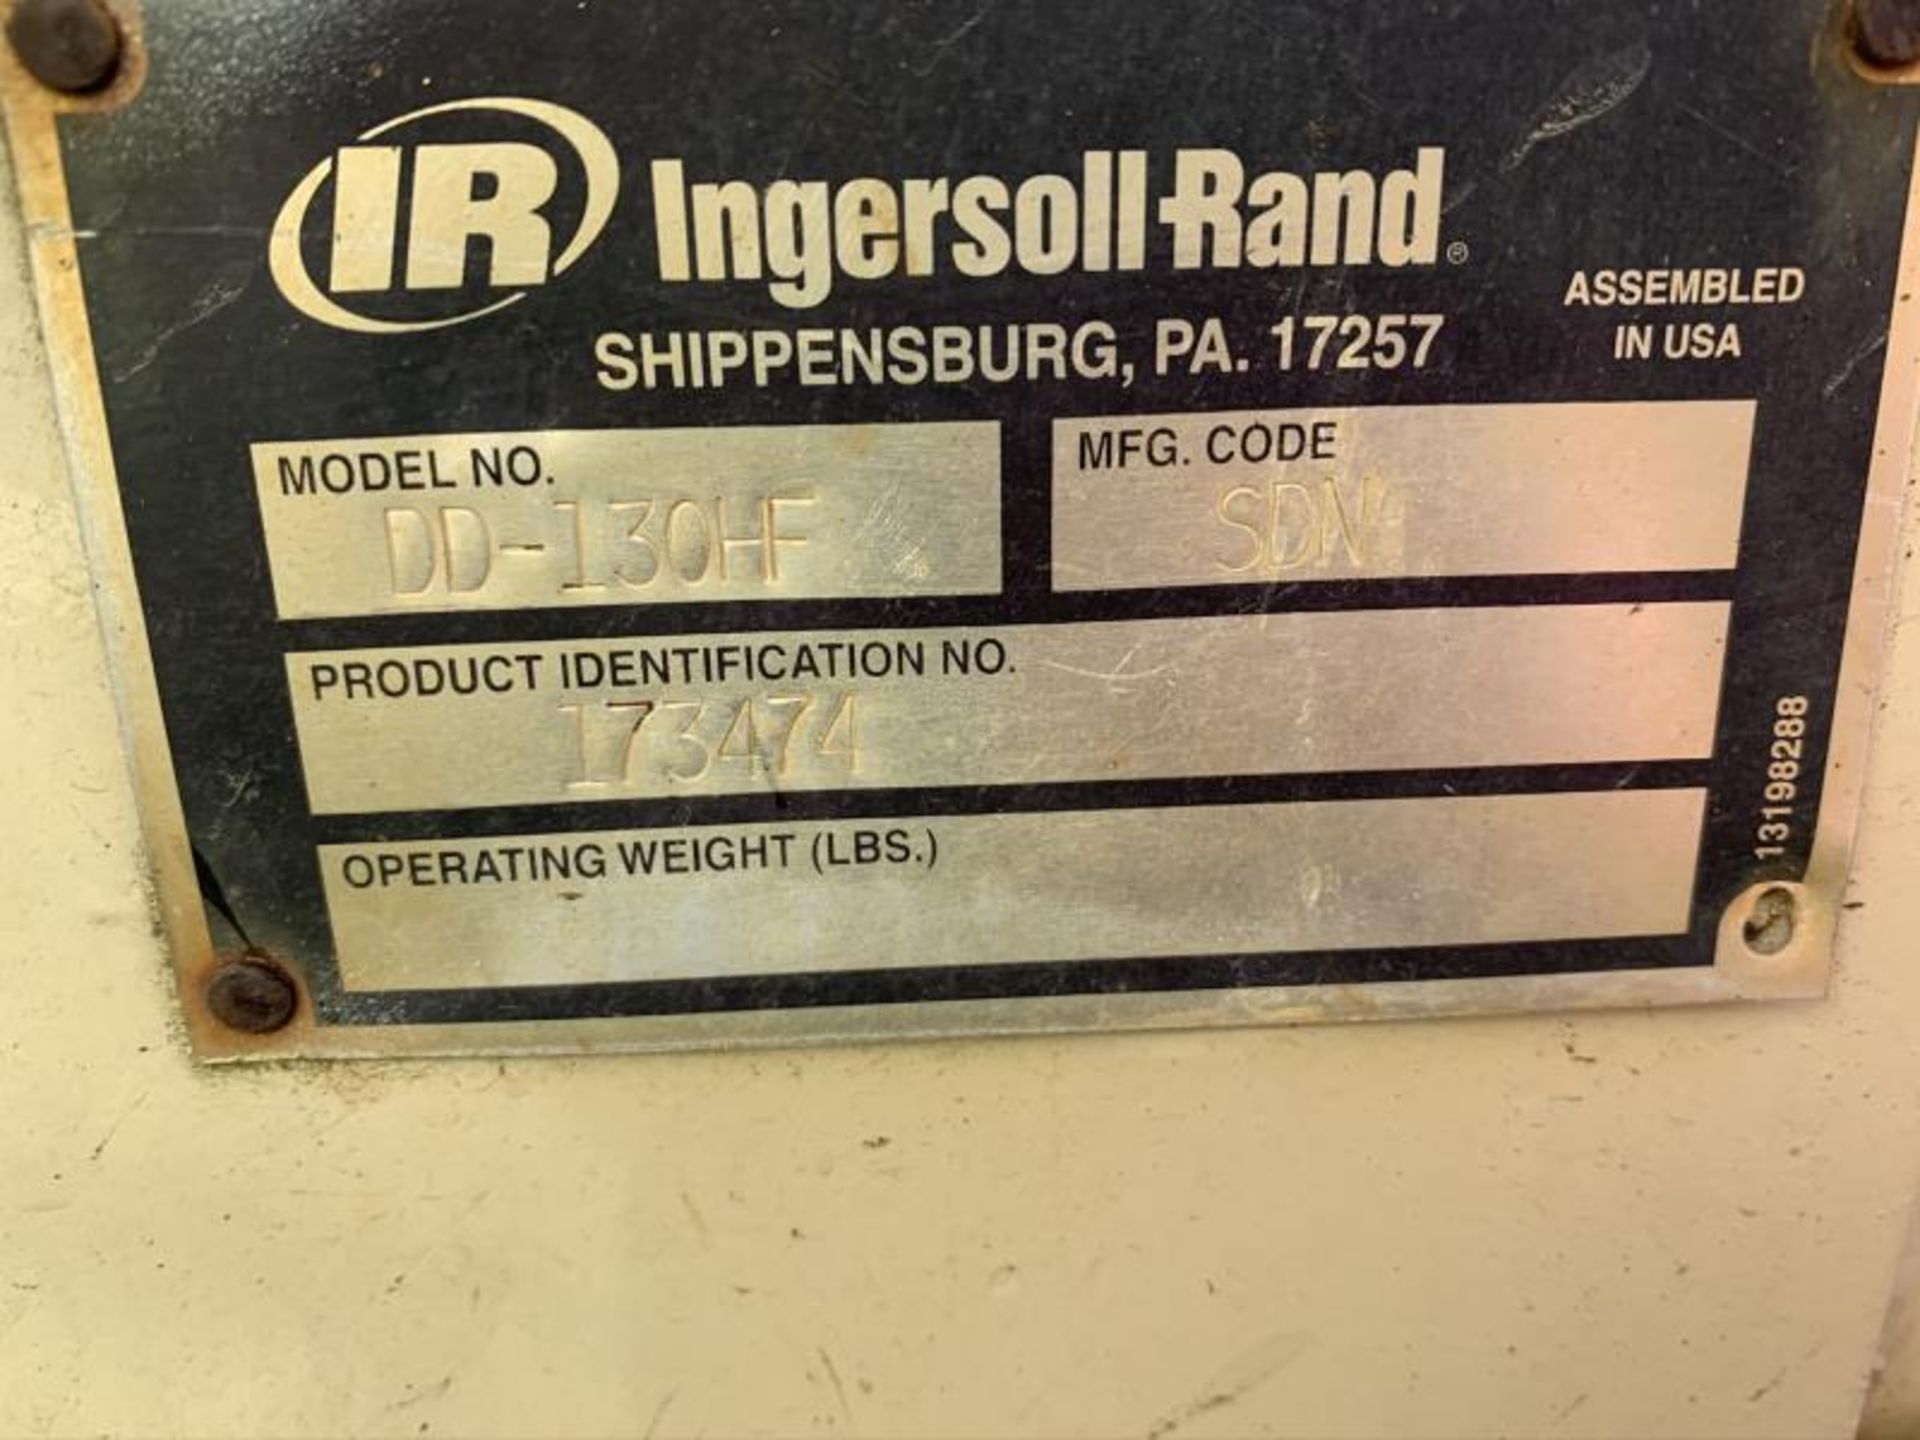 2003 Ingersoll Rand DD-130HF, Double Drum Vibratory Roller, MFG Code: SDN, SN: 173474, 4,263 Hours - Image 19 of 19